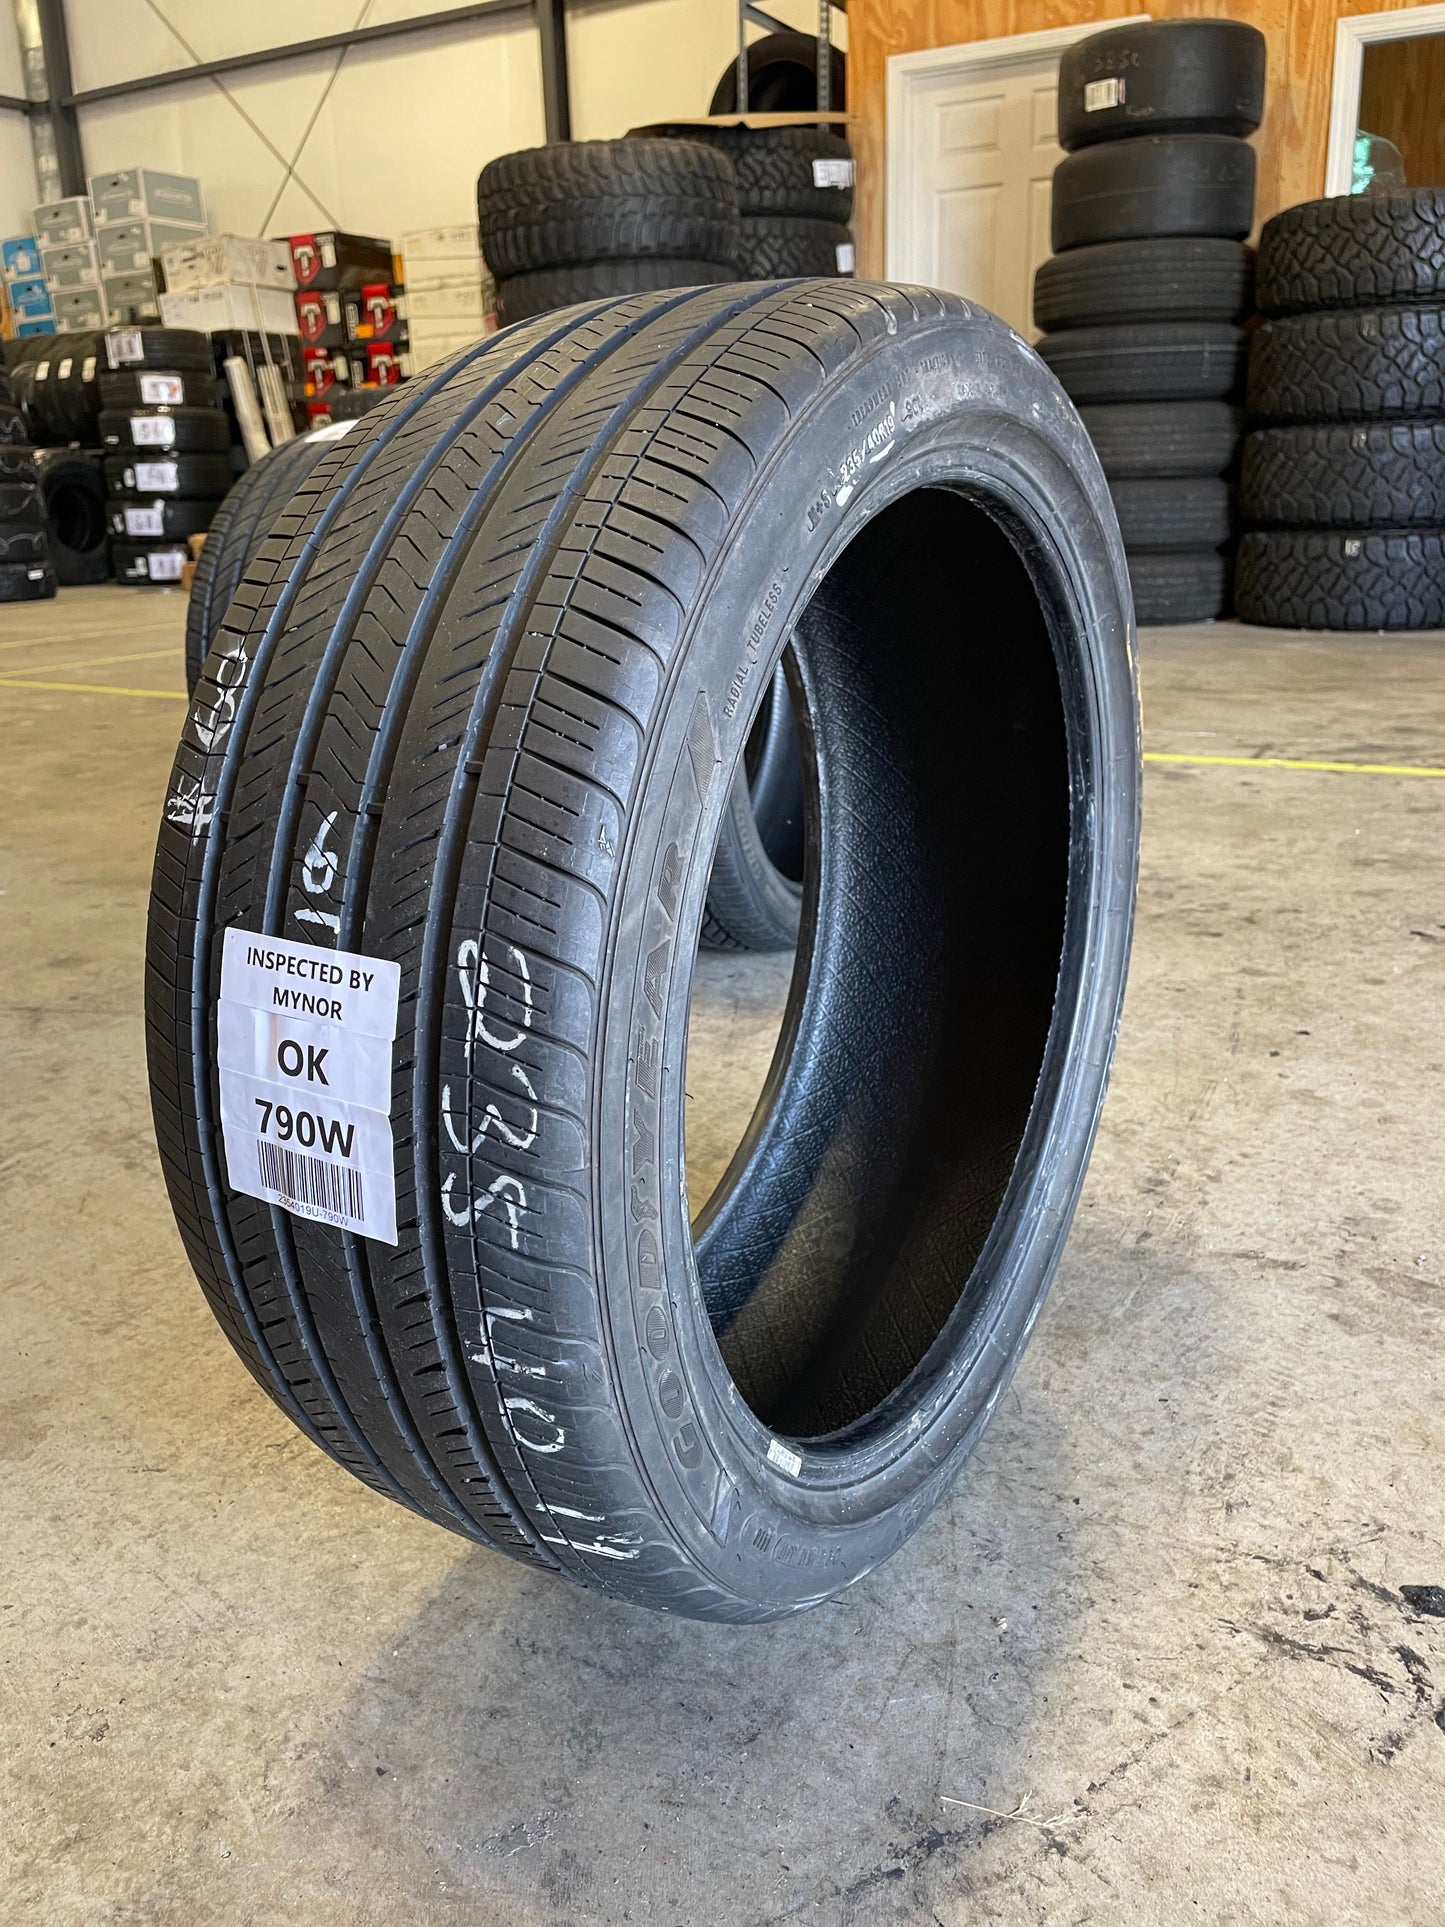 SINGLE 235/40R19 Goodyear Eagle Touring 96V XL - Used Tires